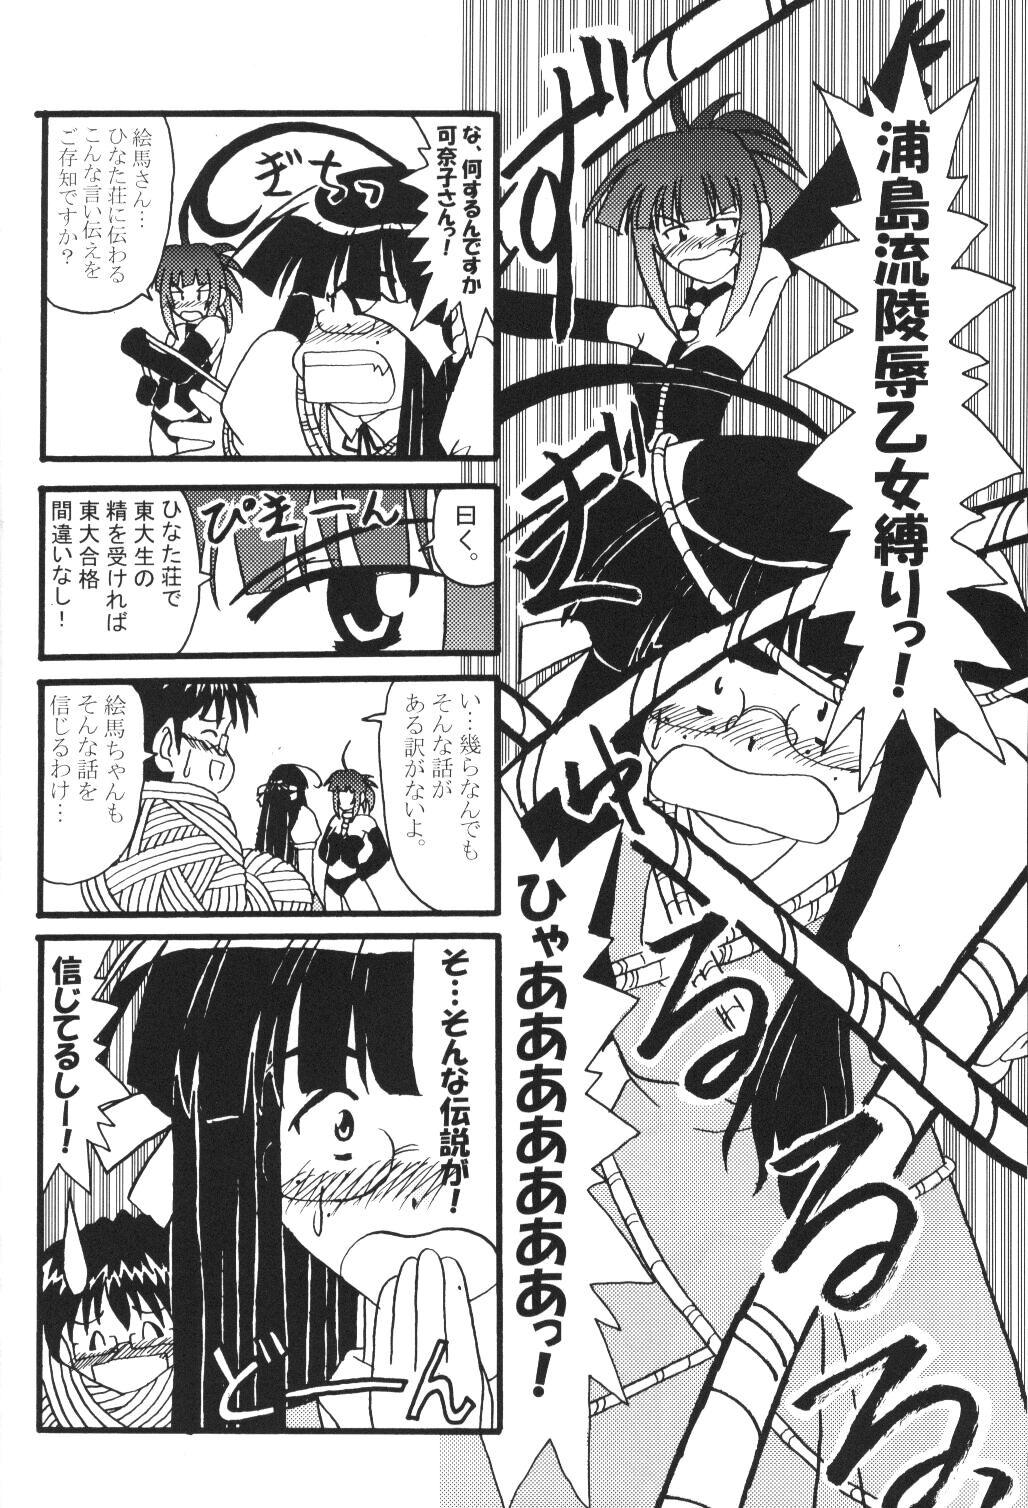 Putaria Sex Appeal 5 - Love hina Topless - Page 7